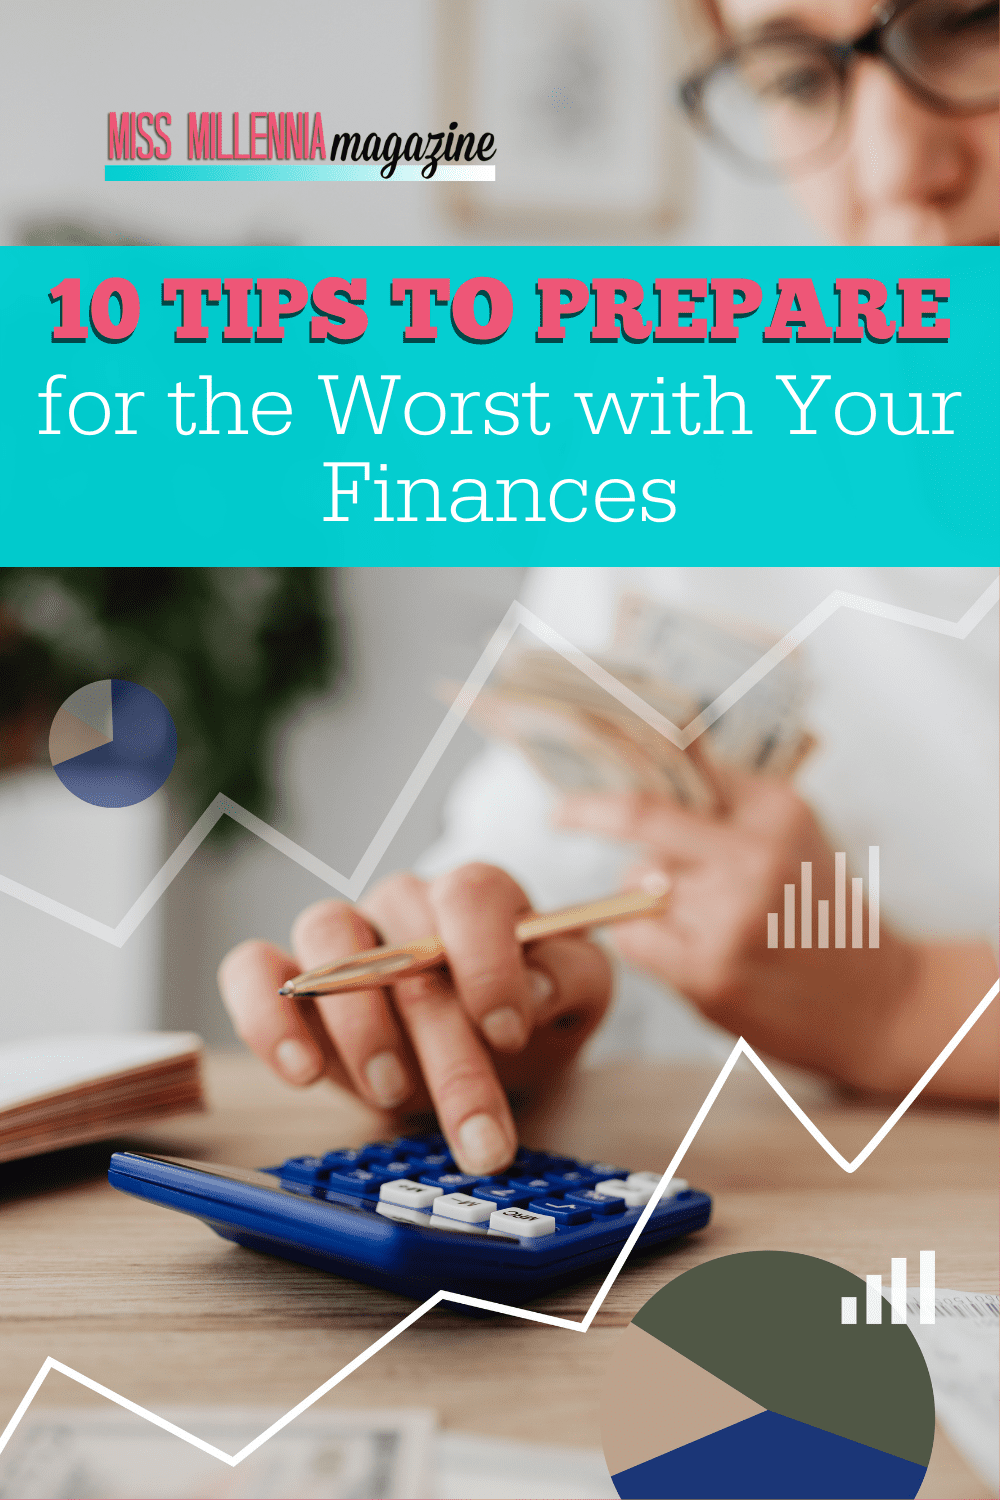 10 Tips to Prepare for the Worst with Your Finances